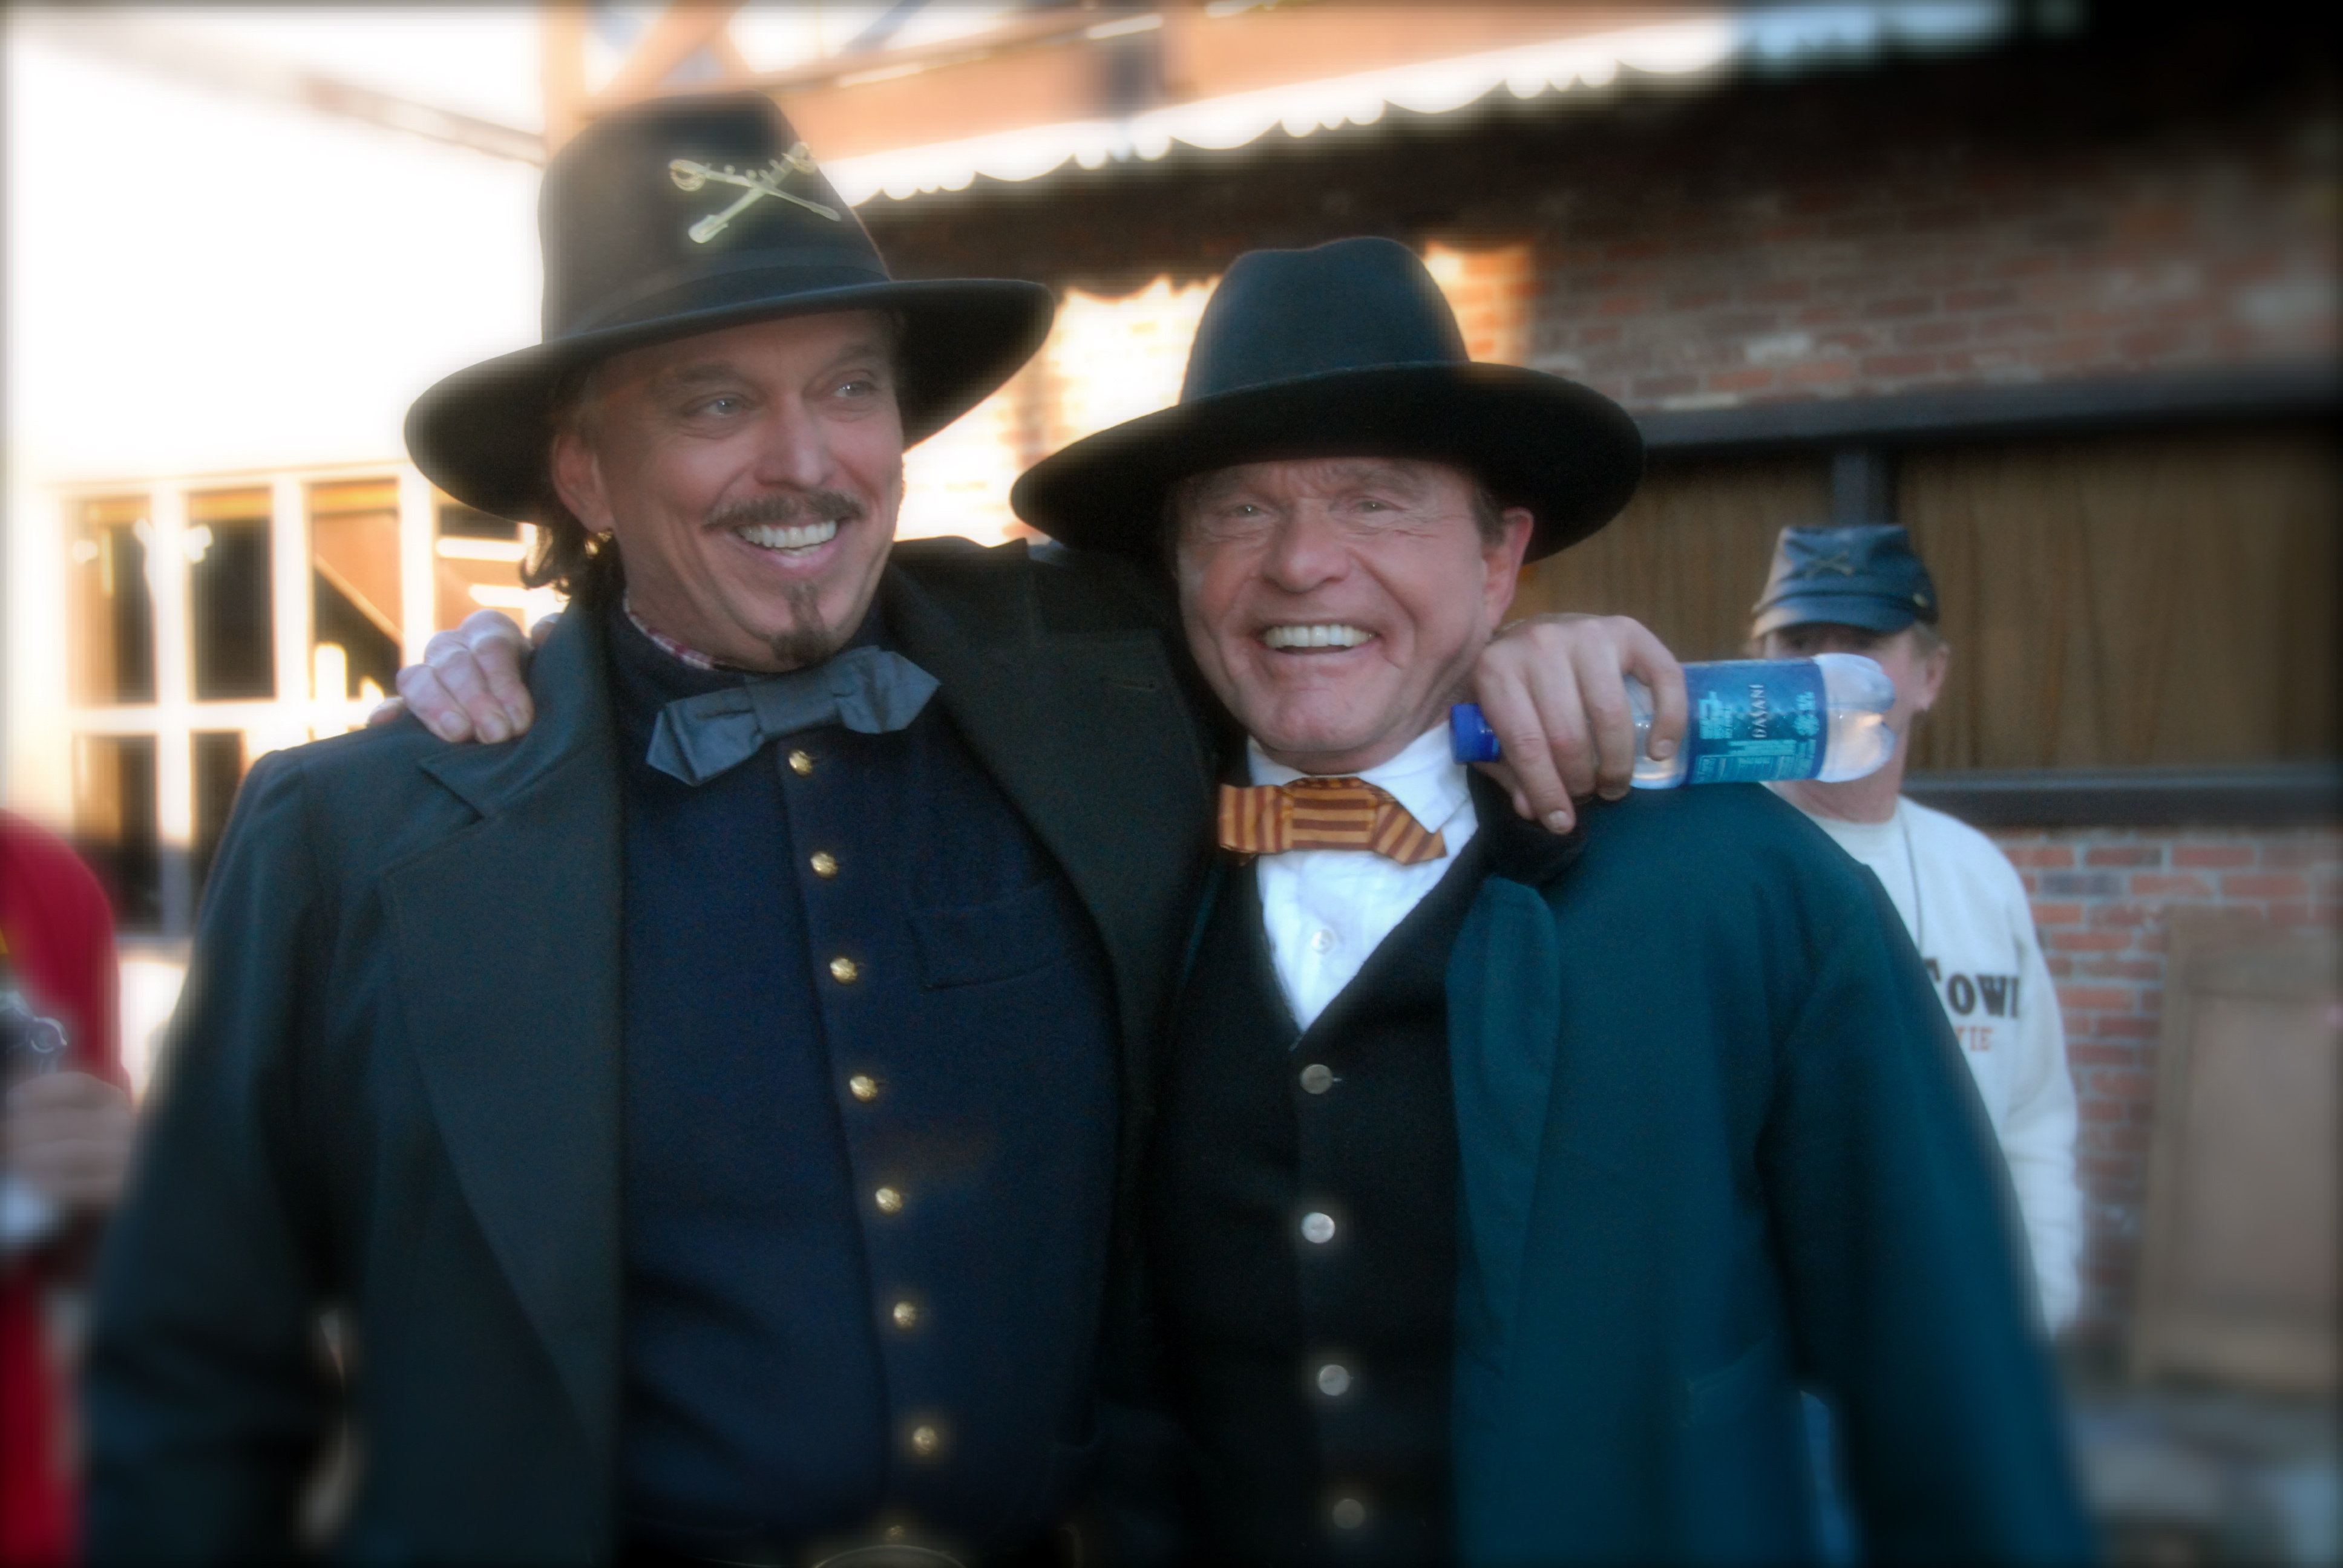 Actors Anthony Hornus, left (Wicked Spring, Miracle at Sage Creek, An Ordinary Killer) shares a hug with Bill McKinney (Deliverance, The Outlaw Josey Wales, The Green Mile), during the wrap of principal photography on Ghost Town, an action/drama filmed in